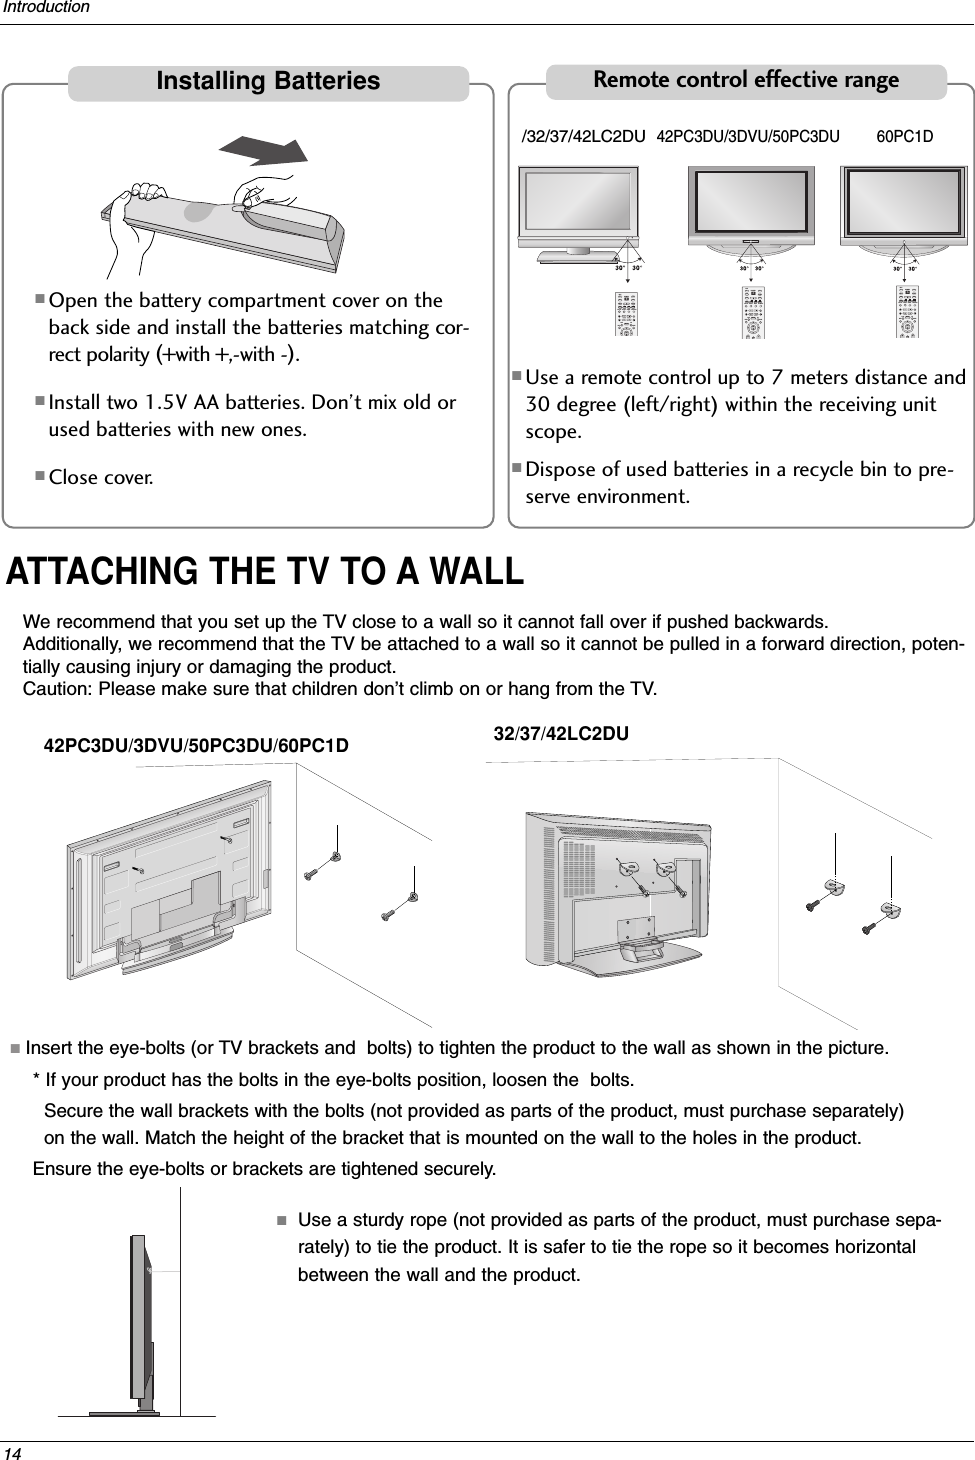 14IntroductionATTACHING THE TV TO A WALLWe recommend that you set up the TV close to a wall so it cannot fall over if pushed backwards. Additionally, we recommend that the TV be attached to a wall so it cannot be pulled in a forward direction, poten-tially causing injury or damaging the product. Caution: Please make sure that children don’t climb on or hang from the TV. ■Insert the eye-bolts (or TV brackets and  bolts) to tighten the product to the wall as shown in the picture. * If your product has the bolts in the eye-bolts position, loosen the  bolts.Secure the wall brackets with the bolts (not provided as parts of the product, must purchase separately)on the wall. Match the height of the bracket that is mounted on the wall to the holes in the product.Ensure the eye-bolts or brackets are tightened securely.■Use a sturdy rope (not provided as parts of the product, must purchase sepa-rately) to tie the product. It is safer to tie the rope so it becomes horizontalbetween the wall and the product.42PC3DU/3DVU/50PC3DU/60PC1D 32/37/42LC2DU■Open the battery compartment cover on theback side and install the batteries matching cor-rect polarity (+with +,-with -).■Install two 1.5V AA batteries. Don’t mix old orused batteries with new ones.■Close cover.■Use a remote control up to 7 meters distance and30 degree (left/right) within the receiving unitscope.■Dispose of used batteries in a recycle bin to pre-serve environment.OK TVTVINPUTINPUTDVDARCEXITPIP PR + PIP INPUTSWAPPIP PR -SLEEPLISTI/IIMENUTEXT PIPSIZEPOSITIONVCRPOWEROK TVTVINPUTINPUTDVDARCEXITPIP PR + PIP INPUTSWAPPIP PR -Q.VIEWSLEEPLISTI/IIMENUTEXT PIPSIZEPOSITIONVCRPOWEROK TVTVINPUTINPUTDVDARCEXITPIP PR + PIP INPUTSWAPPIP PR -Q.VIEWSLEEPLISTI/IIMENUTEXT PIPSIZEPOSITIONVCRPOWER/32/37/42LC2DU42PC3DU/3DVU/50PC3DU 60PC1DInstalling BatteriesRemote control effective range